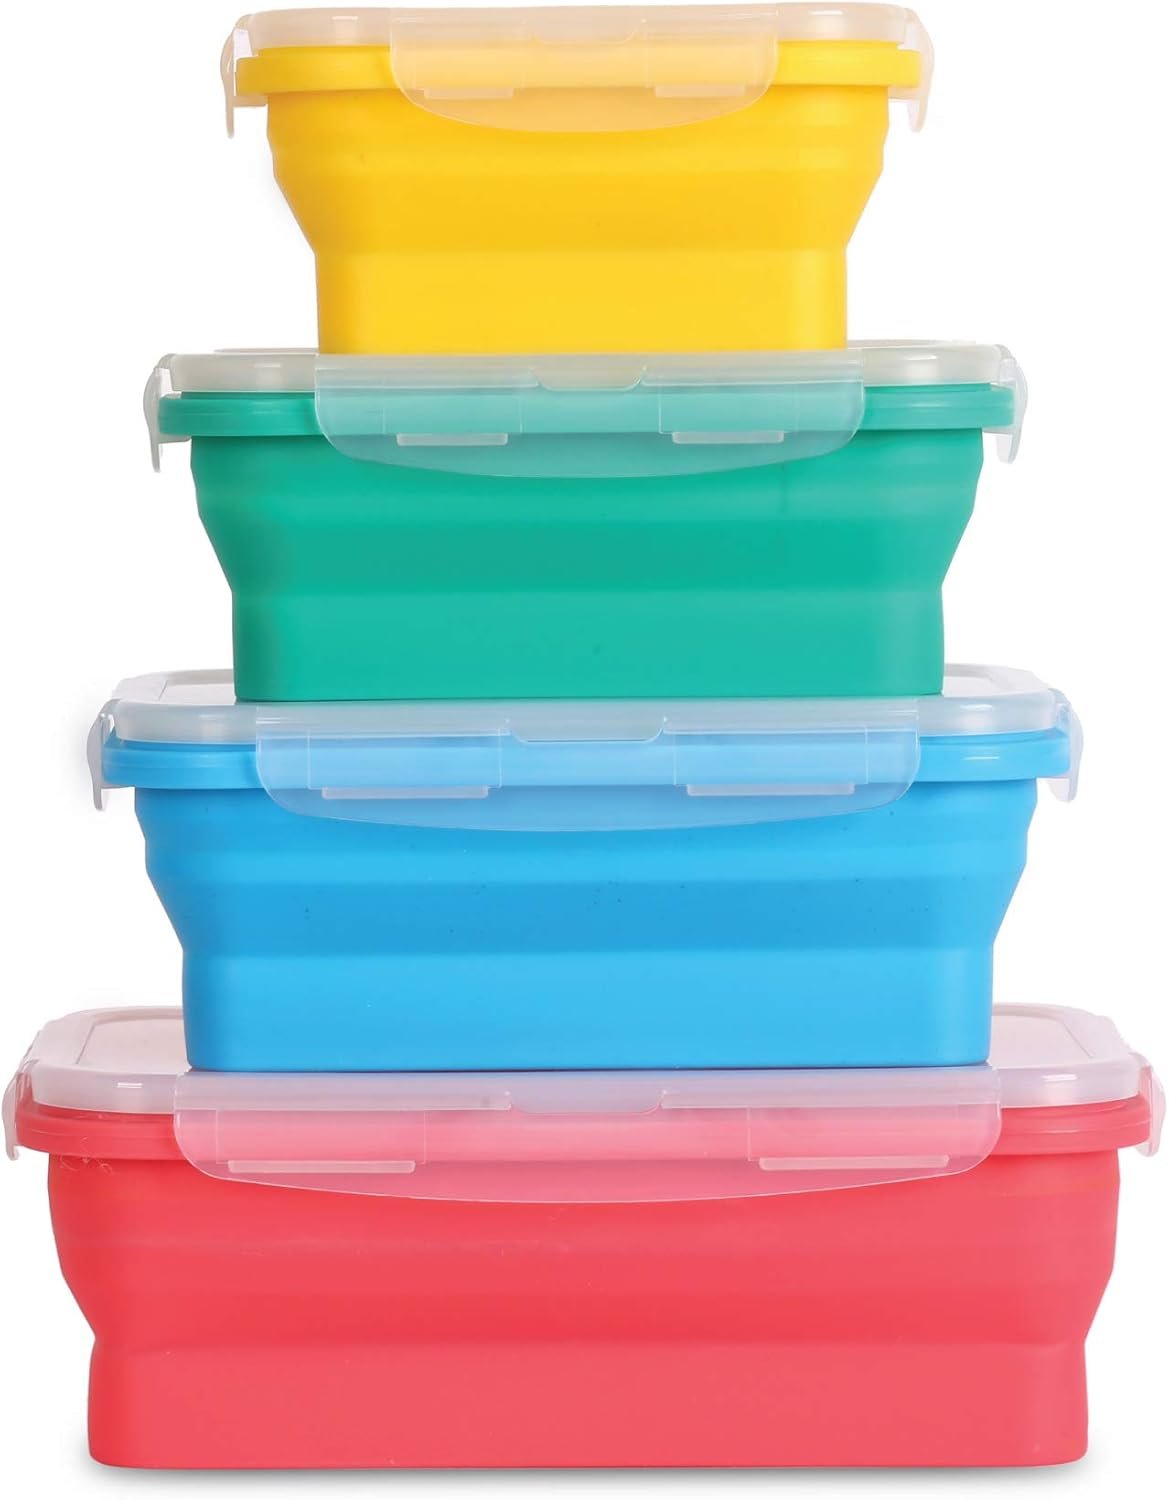 Silicone Food Storage Containers Review